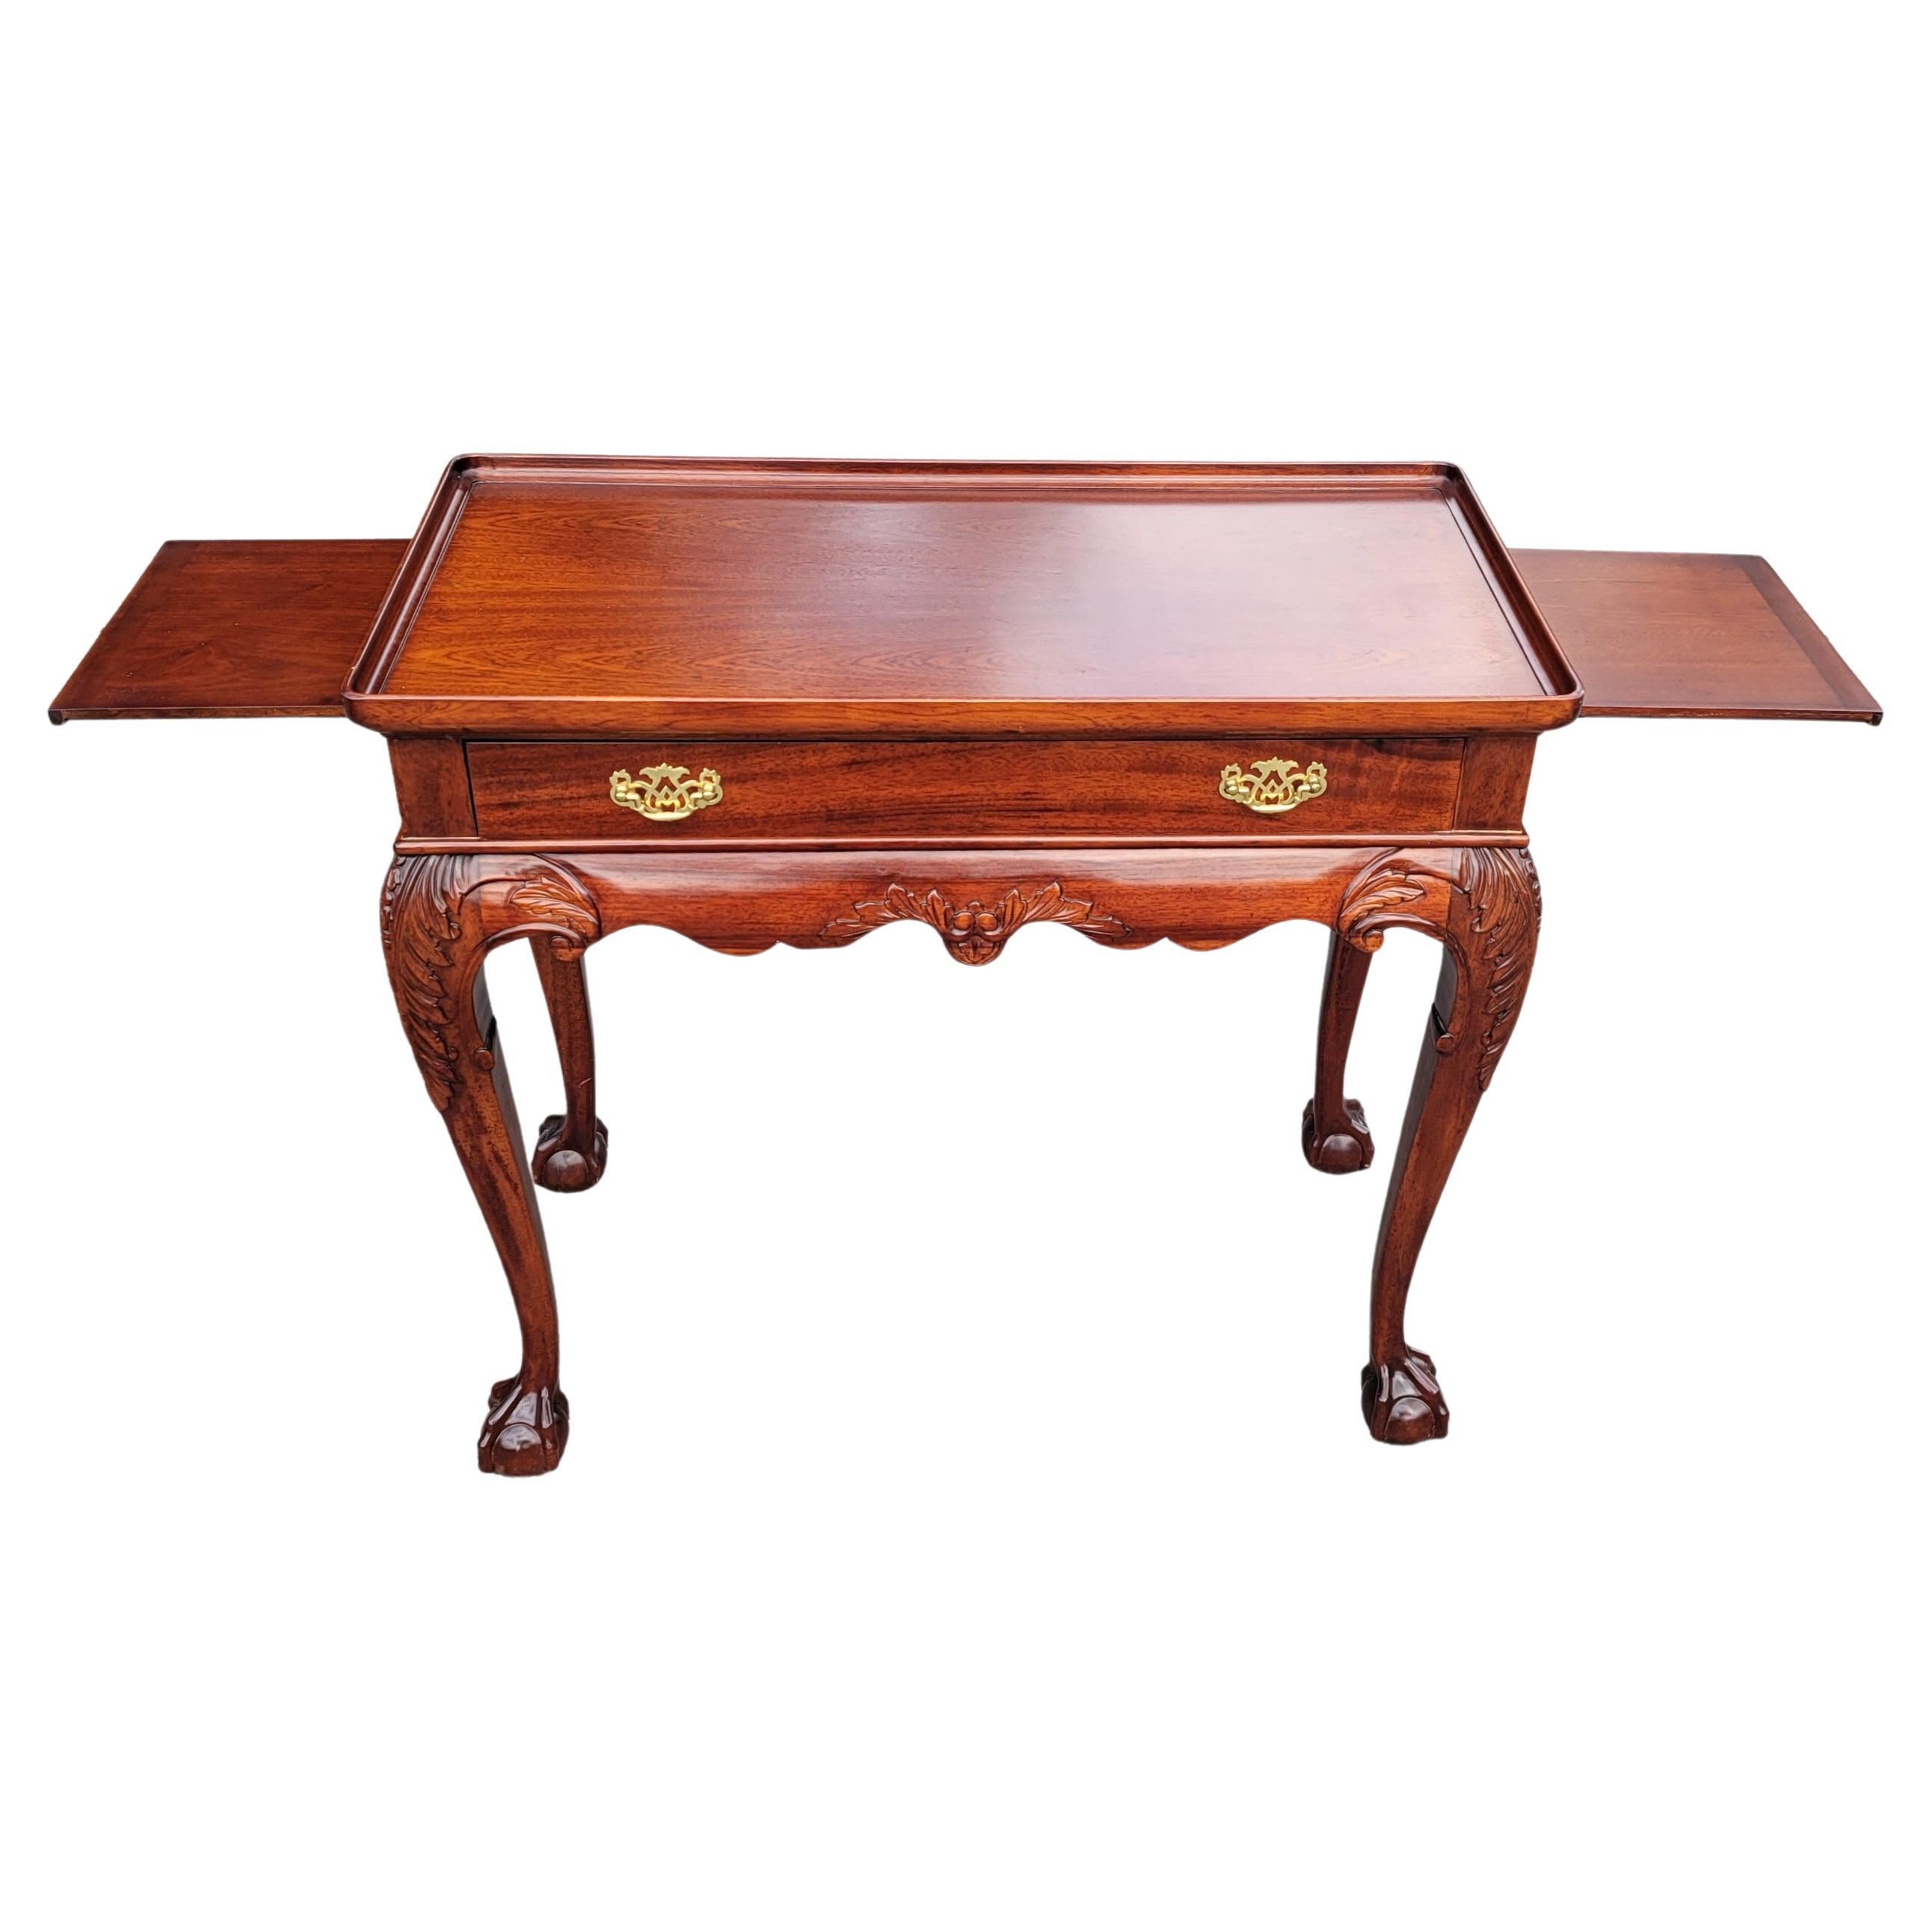 Ball & Claw Chippendale Mahogany Server Console  with Gallery and Pull-out Trays In Good Condition For Sale In Germantown, MD